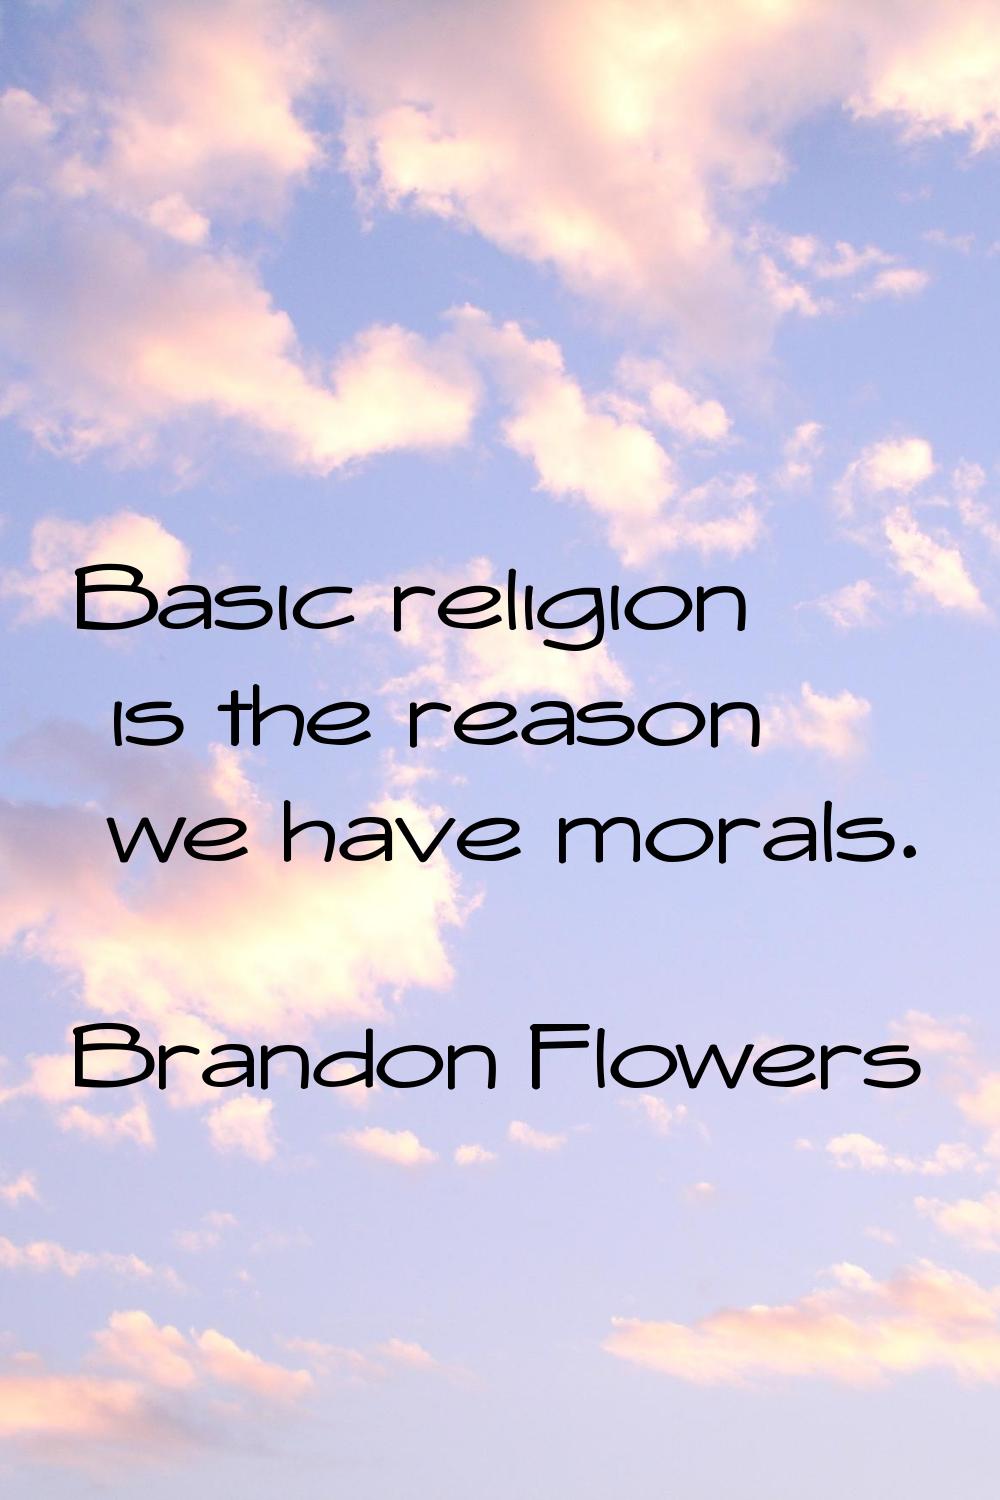 Basic religion is the reason we have morals.